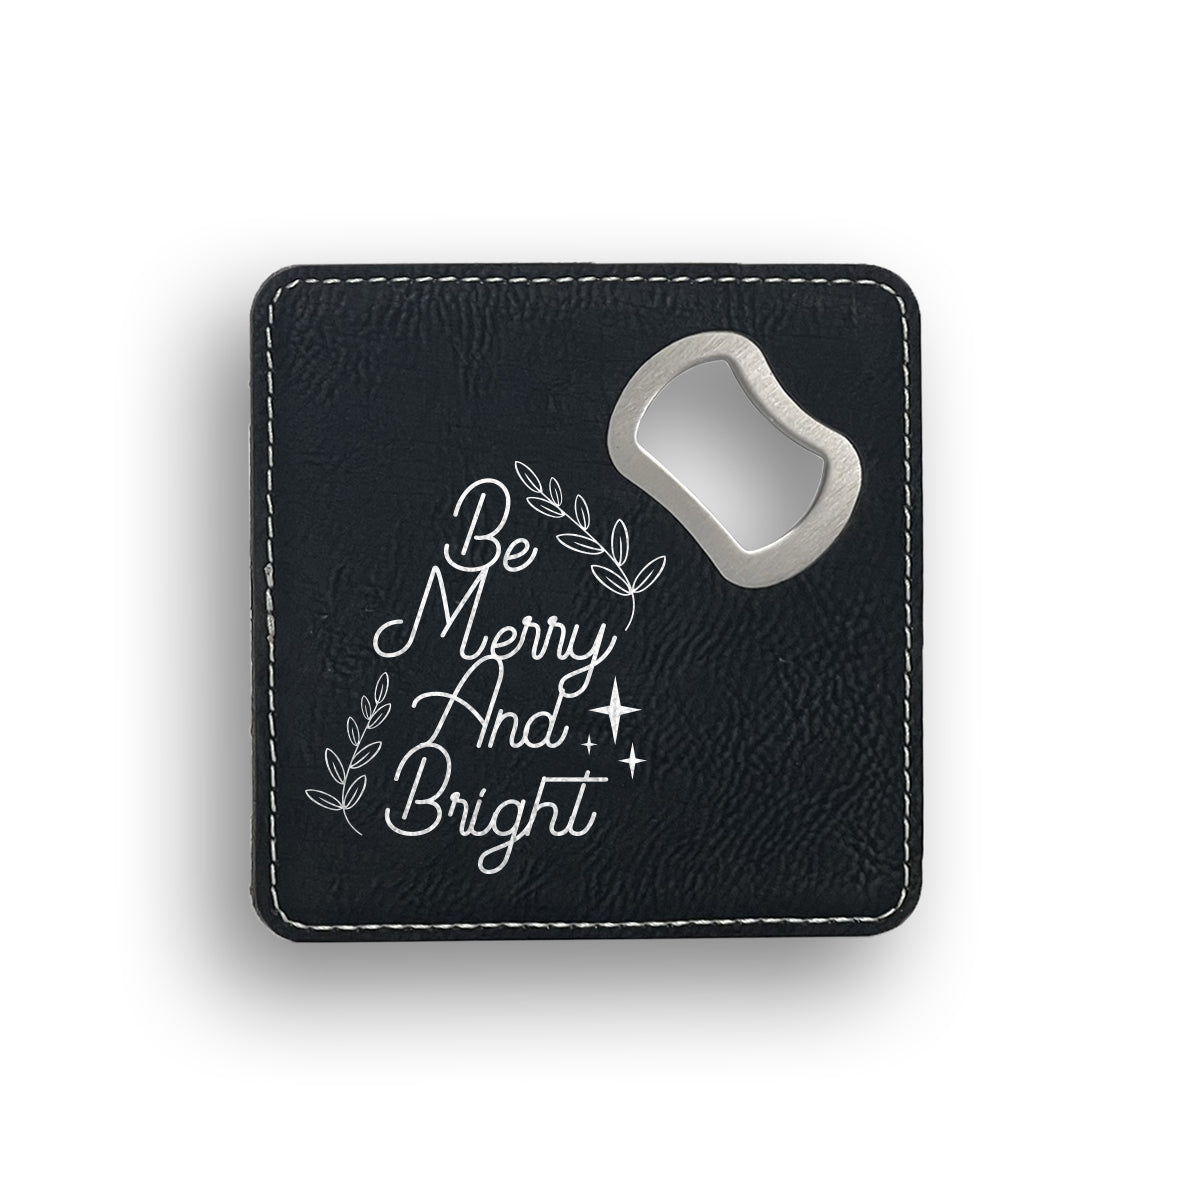 Be Merry And Bright Bottle Opener Coaster